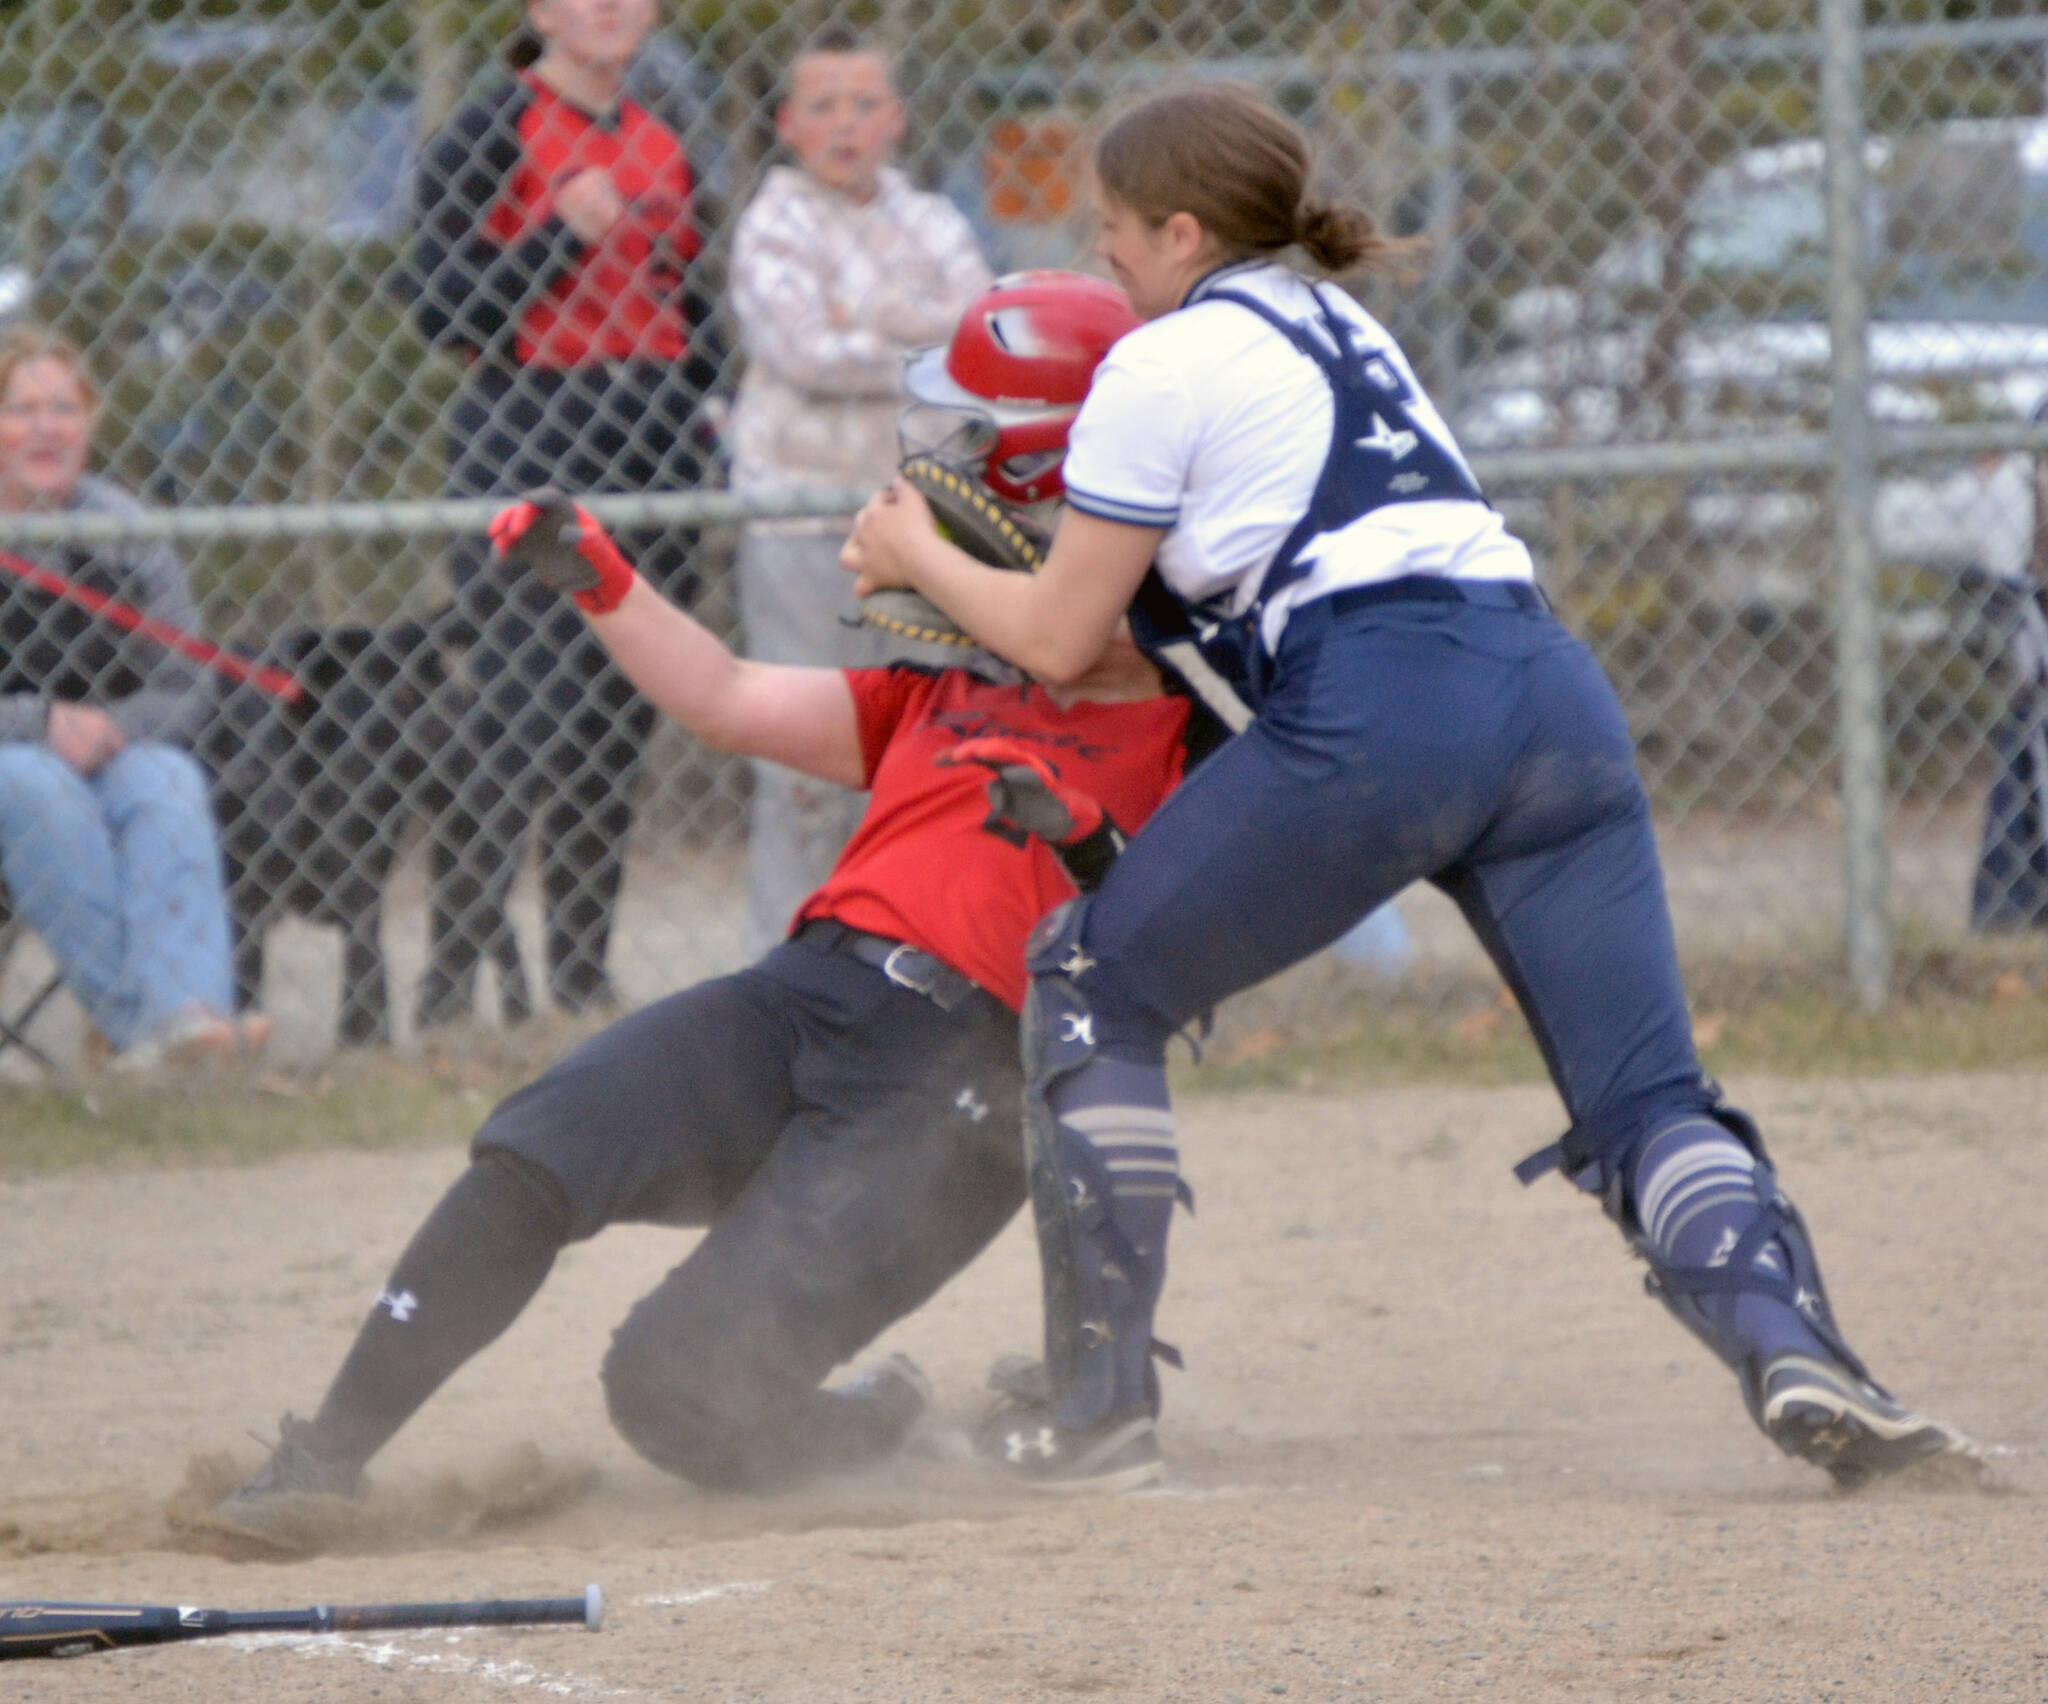 Soldotna catcher Bailey Conner tags out Kenai Central’s Kailey Stynsberg on Monday, May 16, 2022, at the Soldotna Little League fields in Soldotna, Alaska. (Photo by Jeff Helminiak/Peninsula Clarion)